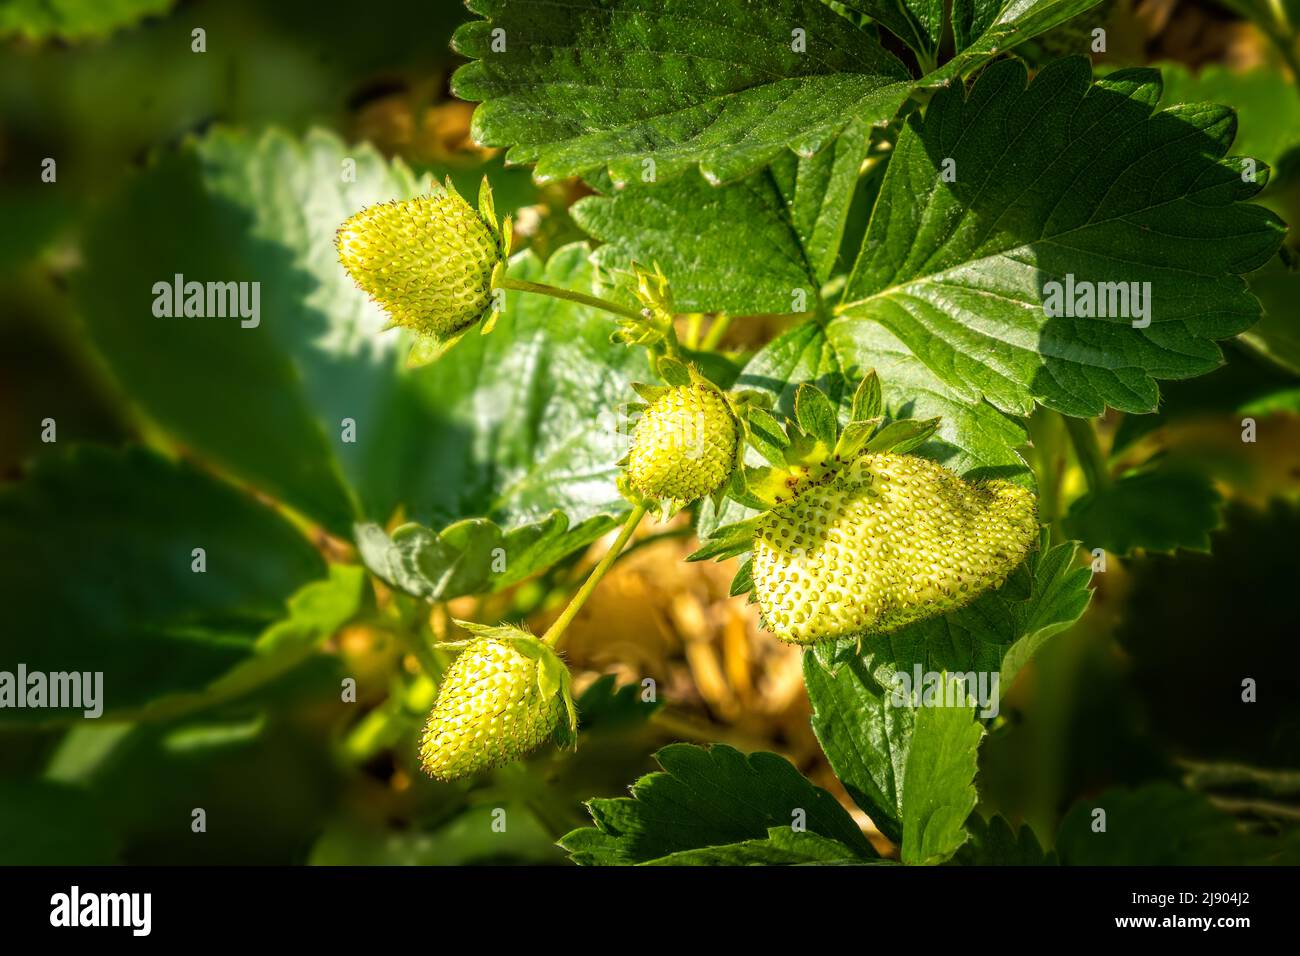 Green, unripe strawberries growing until they will turn red and ready to harvest Stock Photo